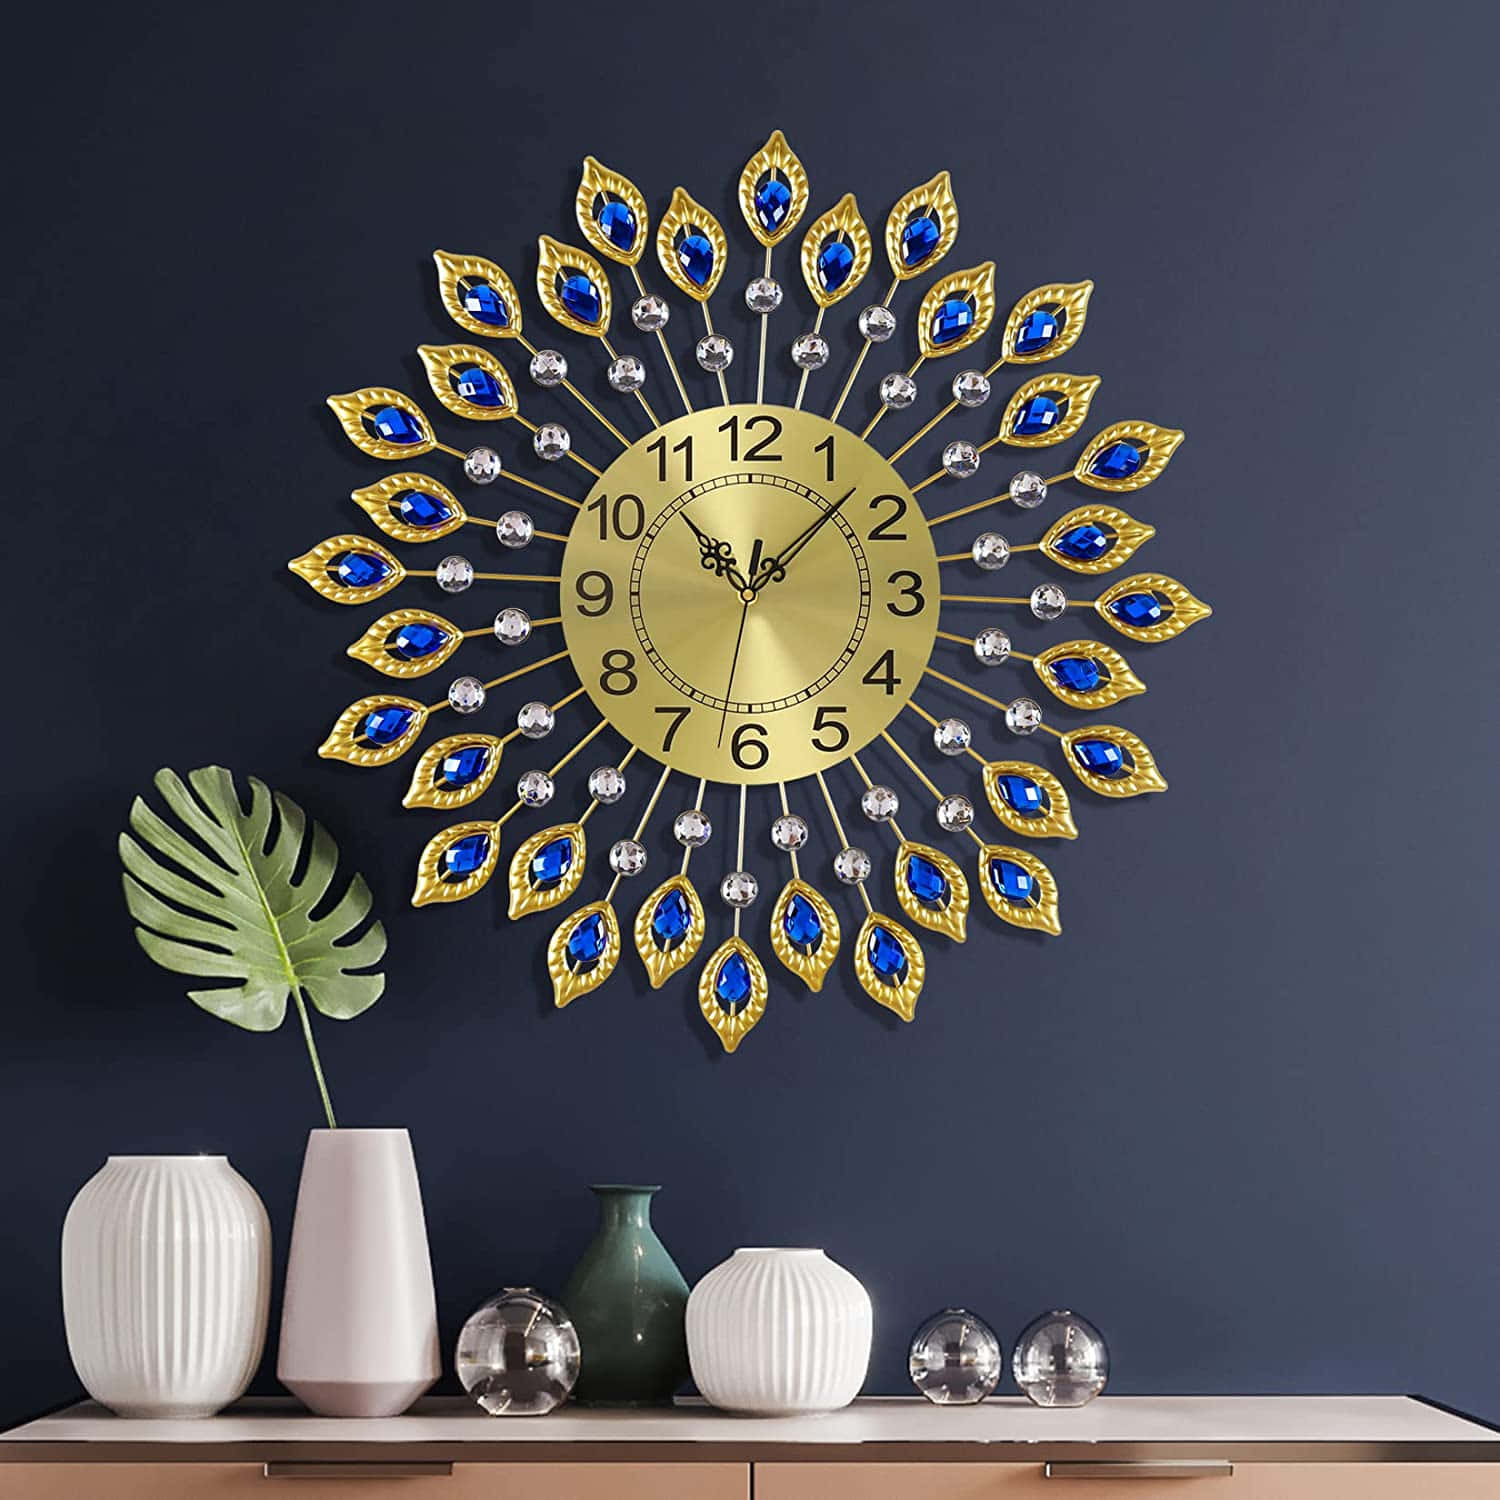 A Blue And Gold Peacock Wall Clock On A Wall